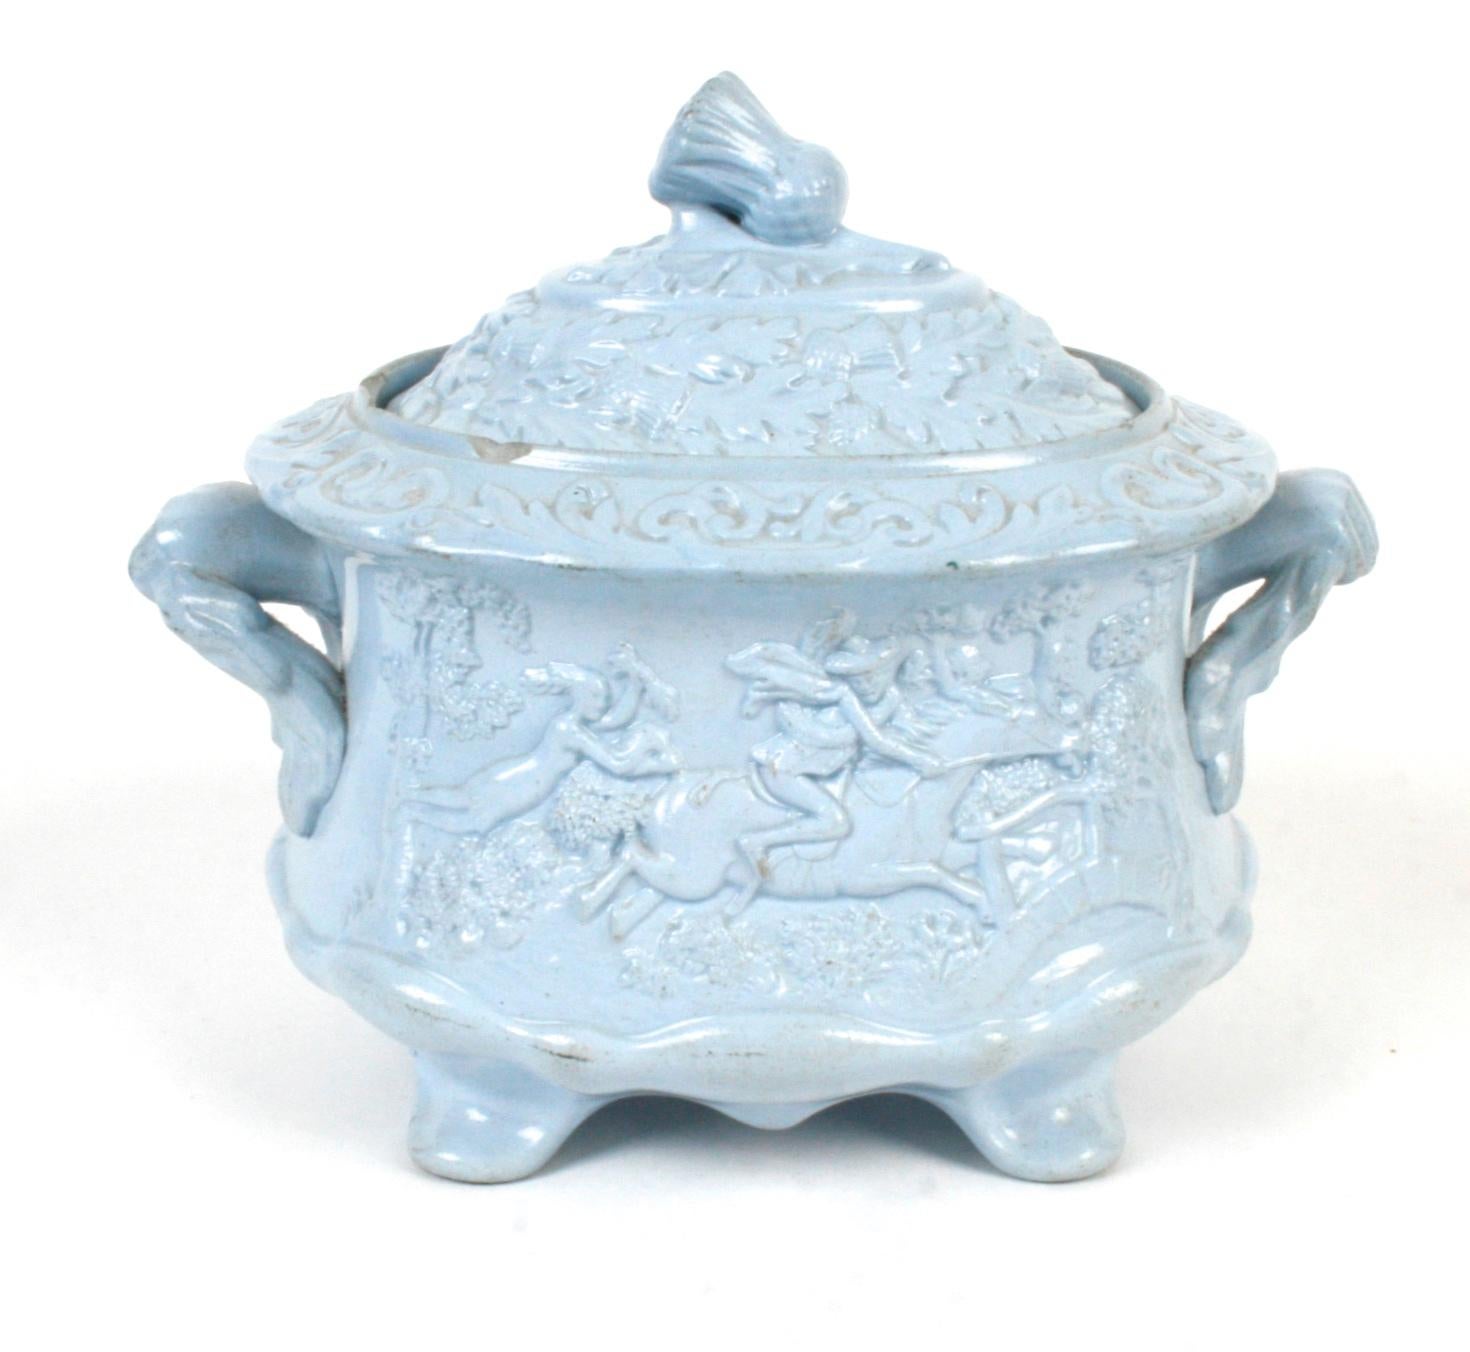 Embossed William Ridgway & Co. Blue Relief Molded Staffordshire Dinnerware, circa 1830